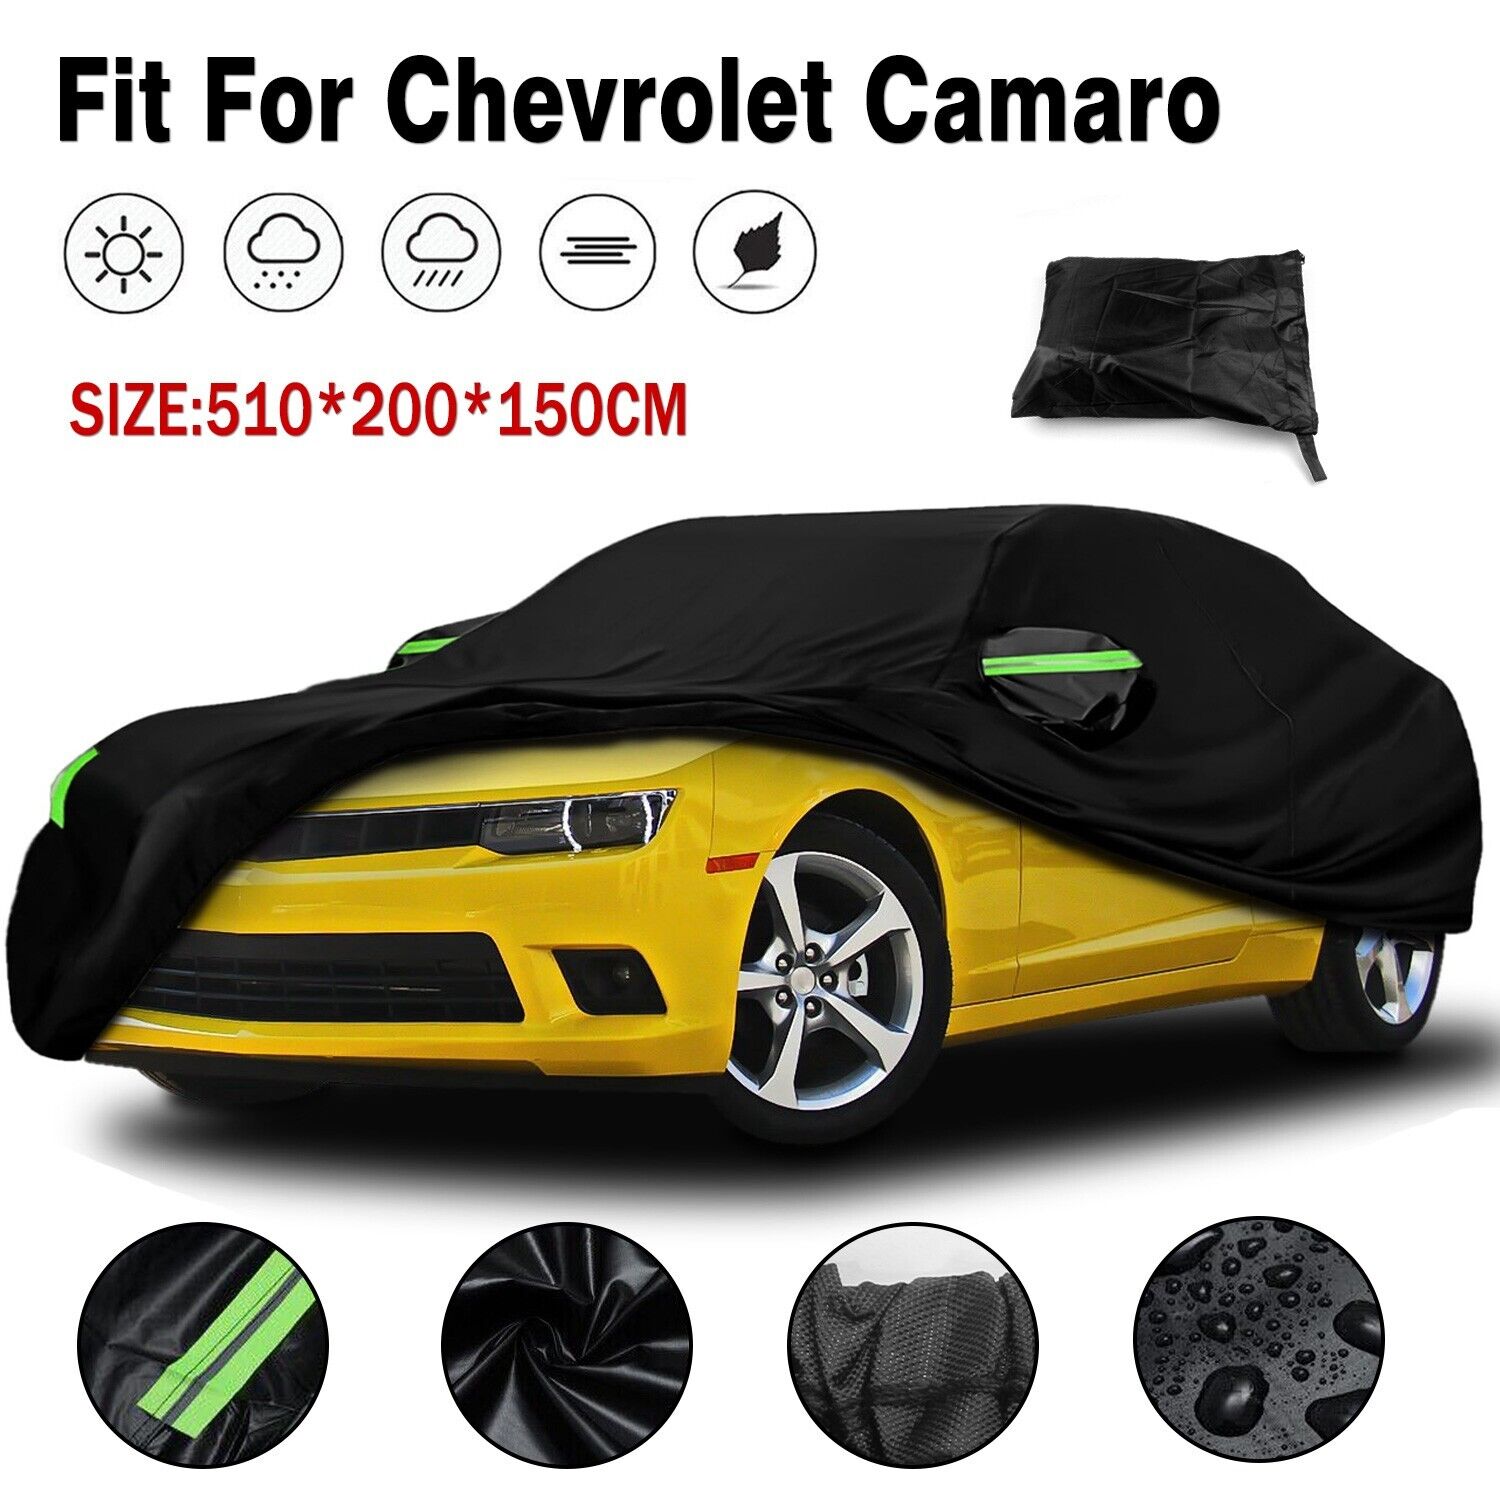 Full Car Cover Outdoor Waterproof UV All Weather Protection For Chevrolet Camaro